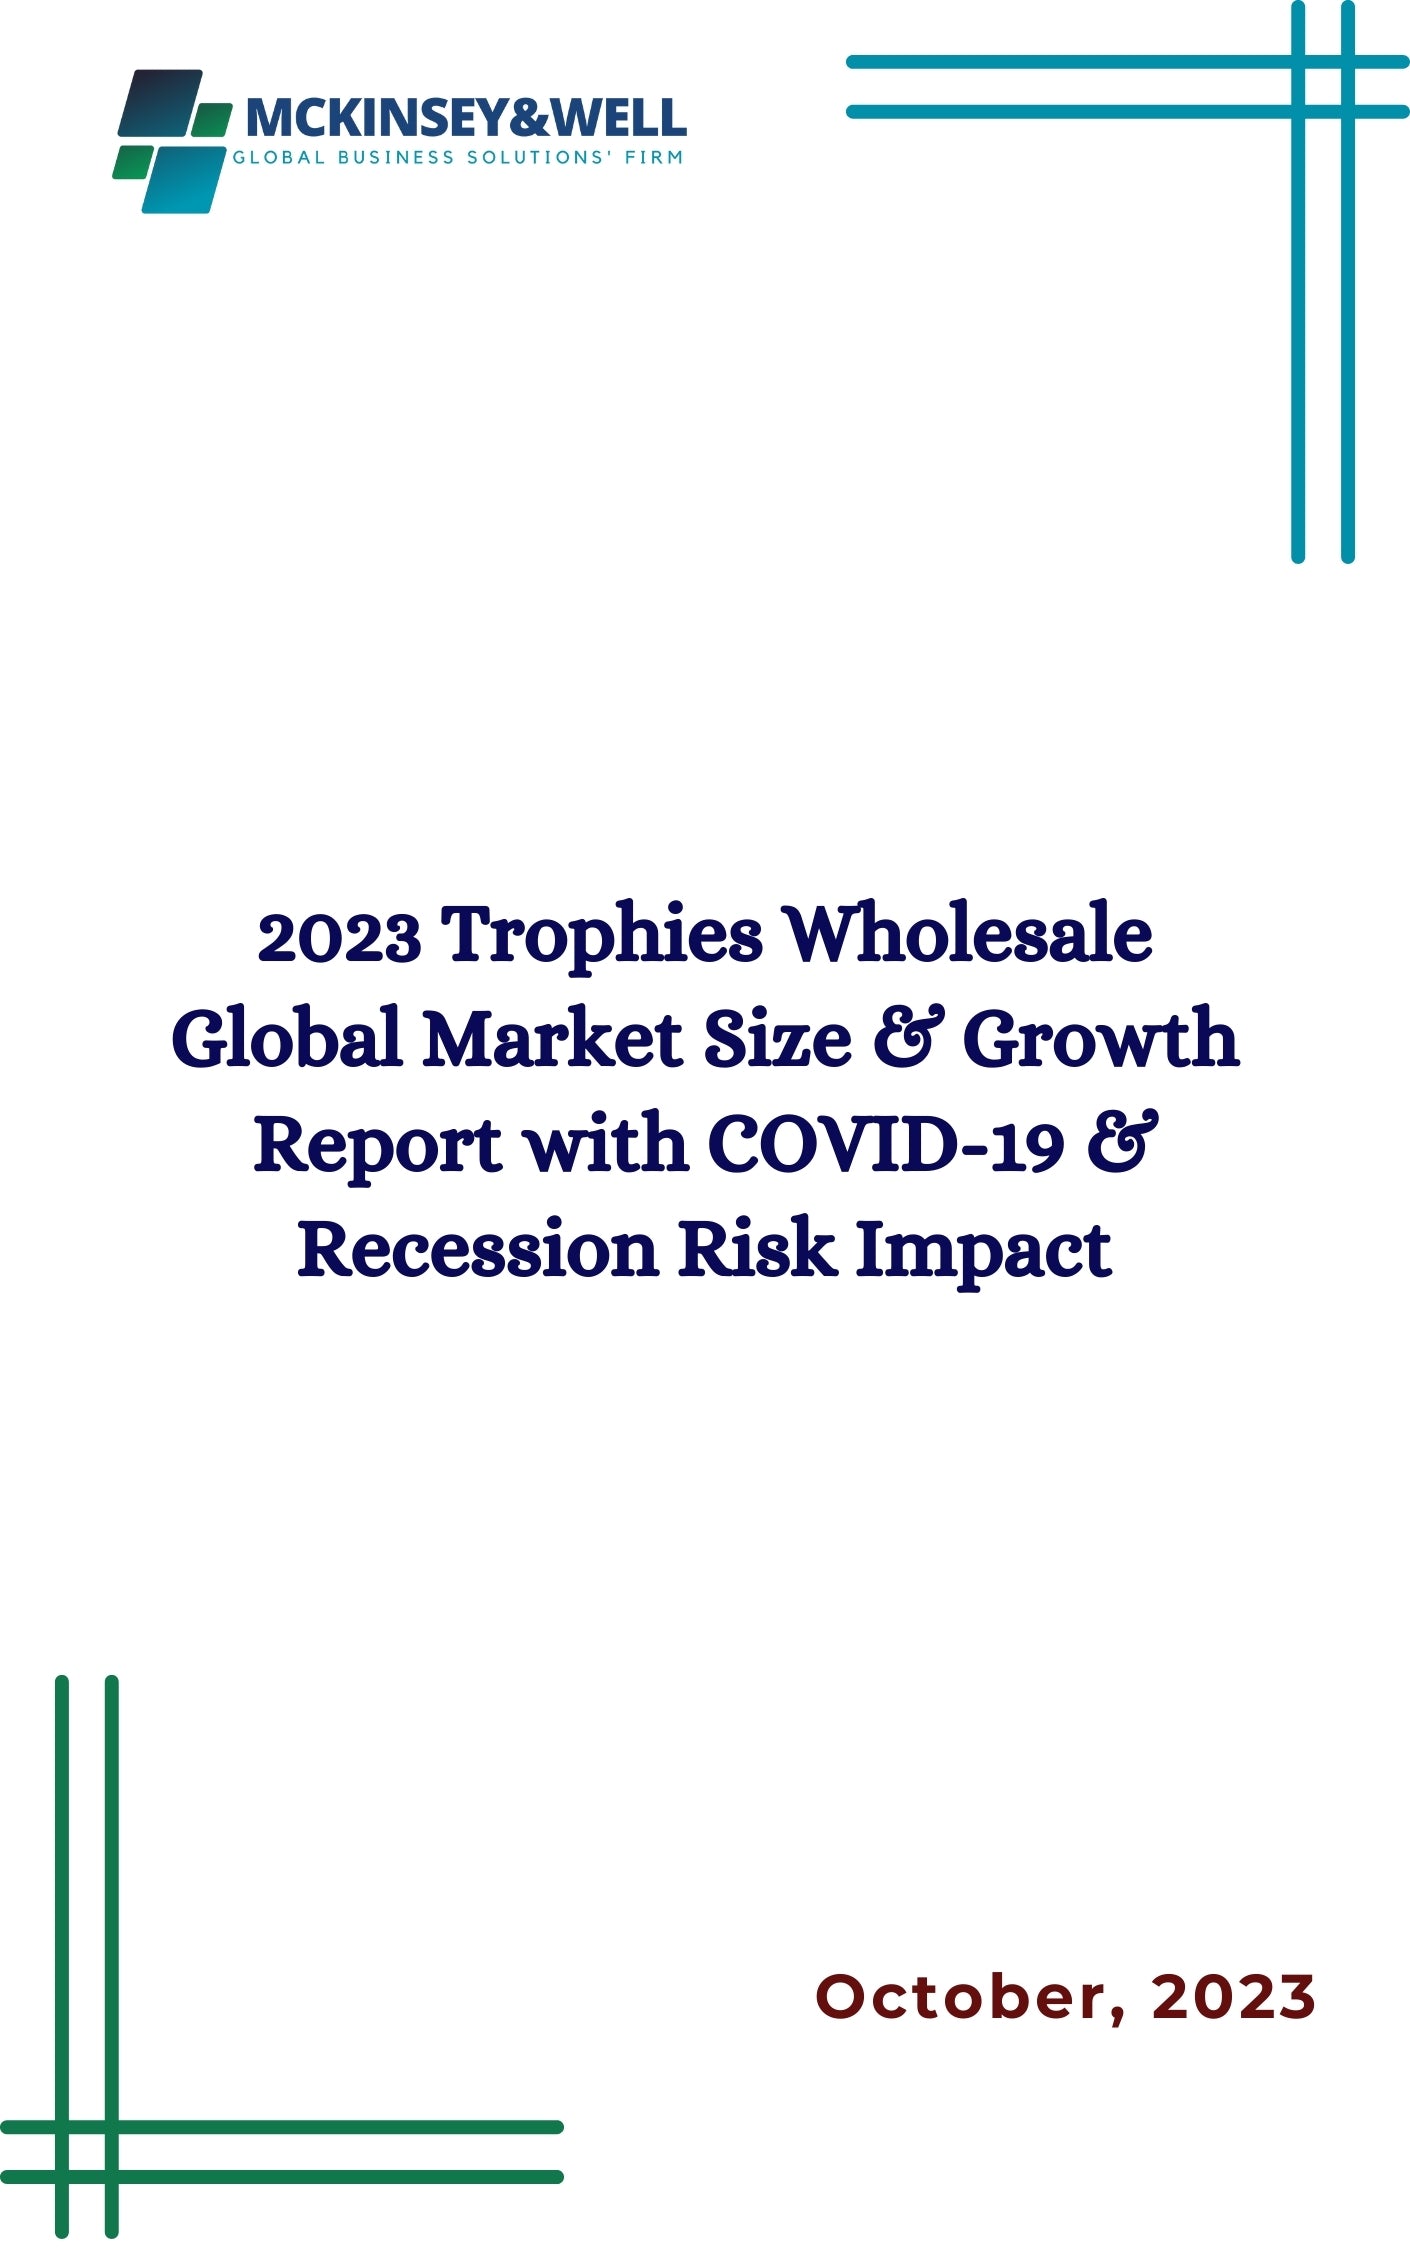 2023 Trophies Wholesale Global Market Size & Growth Report with COVID-19 & Recession Risk Impact